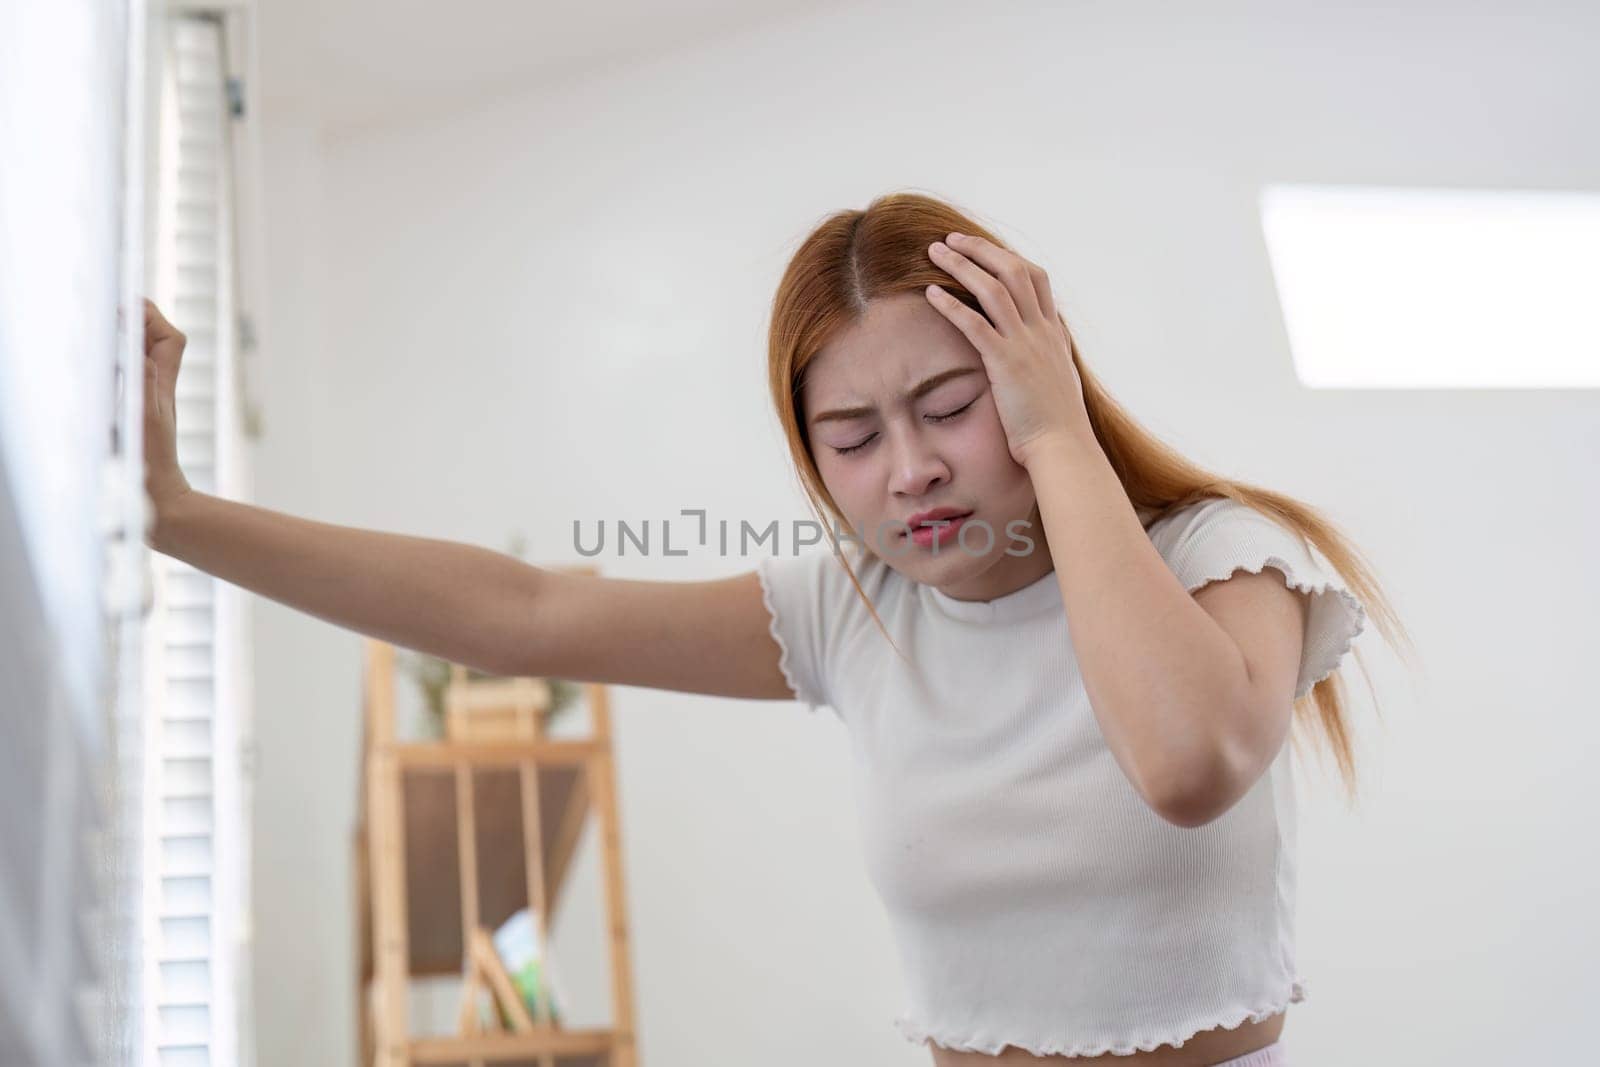 A young woman experiencing a severe headache, holding her head in pain while standing in a bright, modern room.